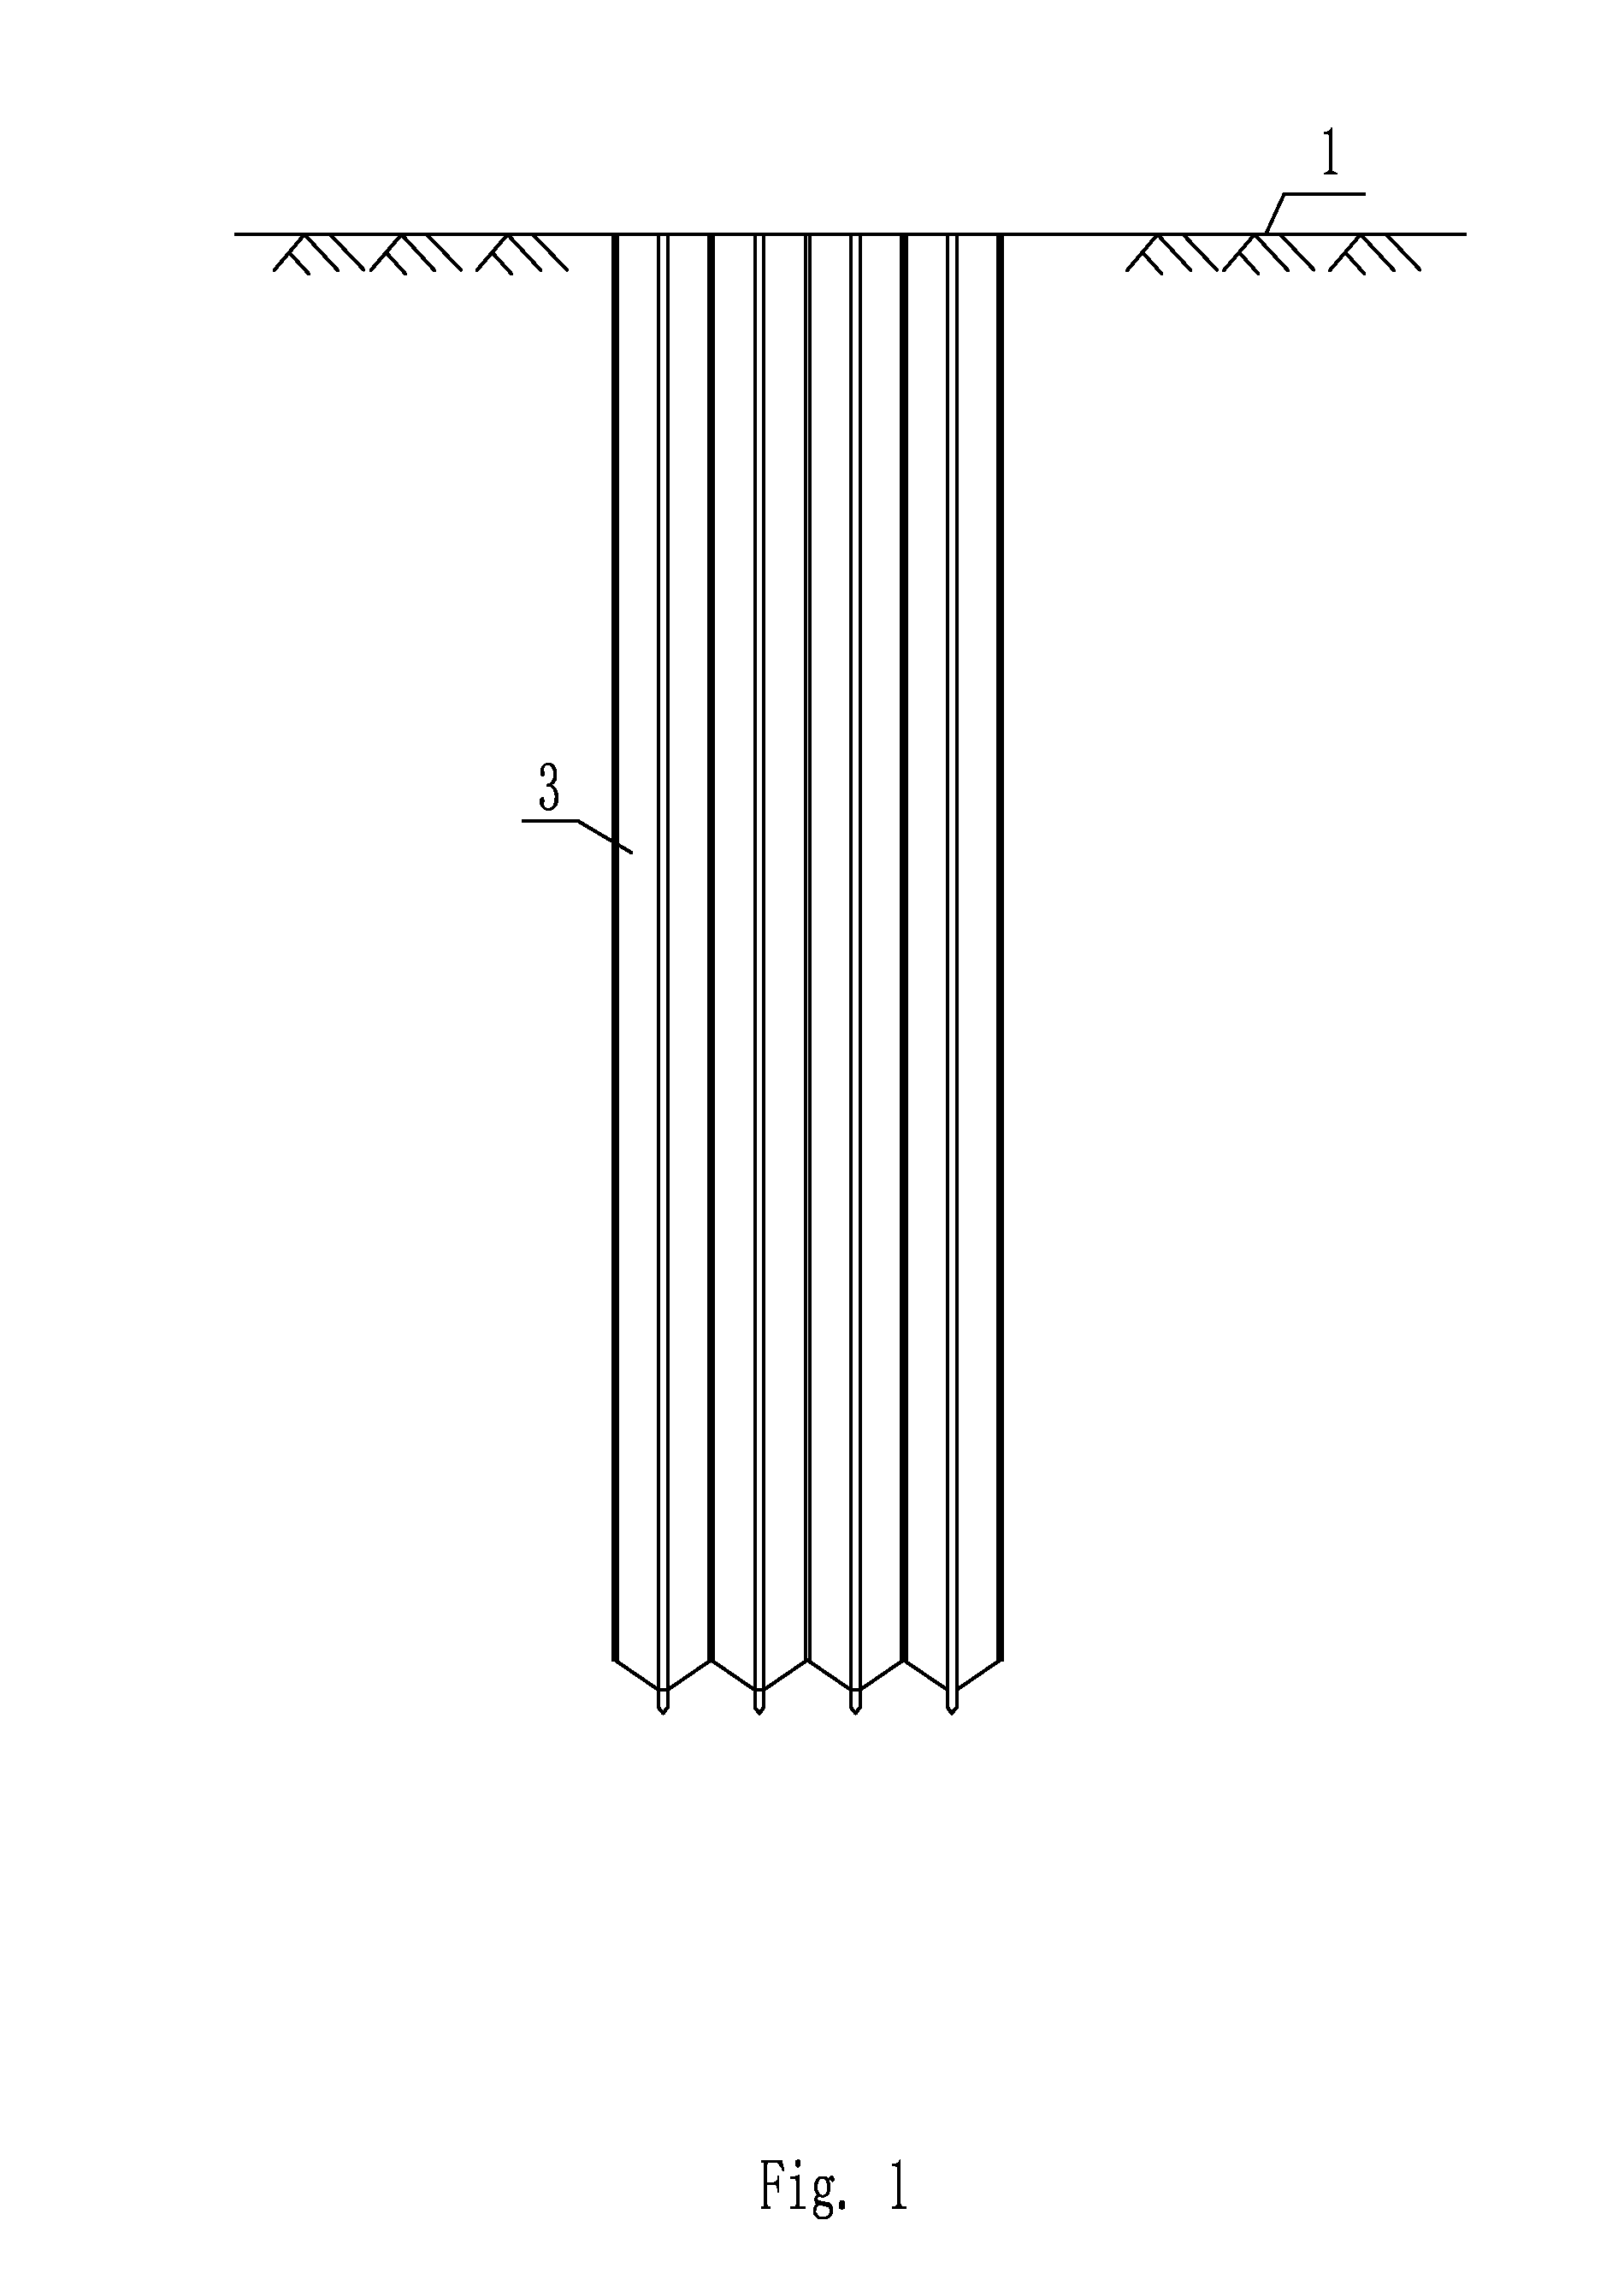 Polymer grouting method for constructing vertical supporting system